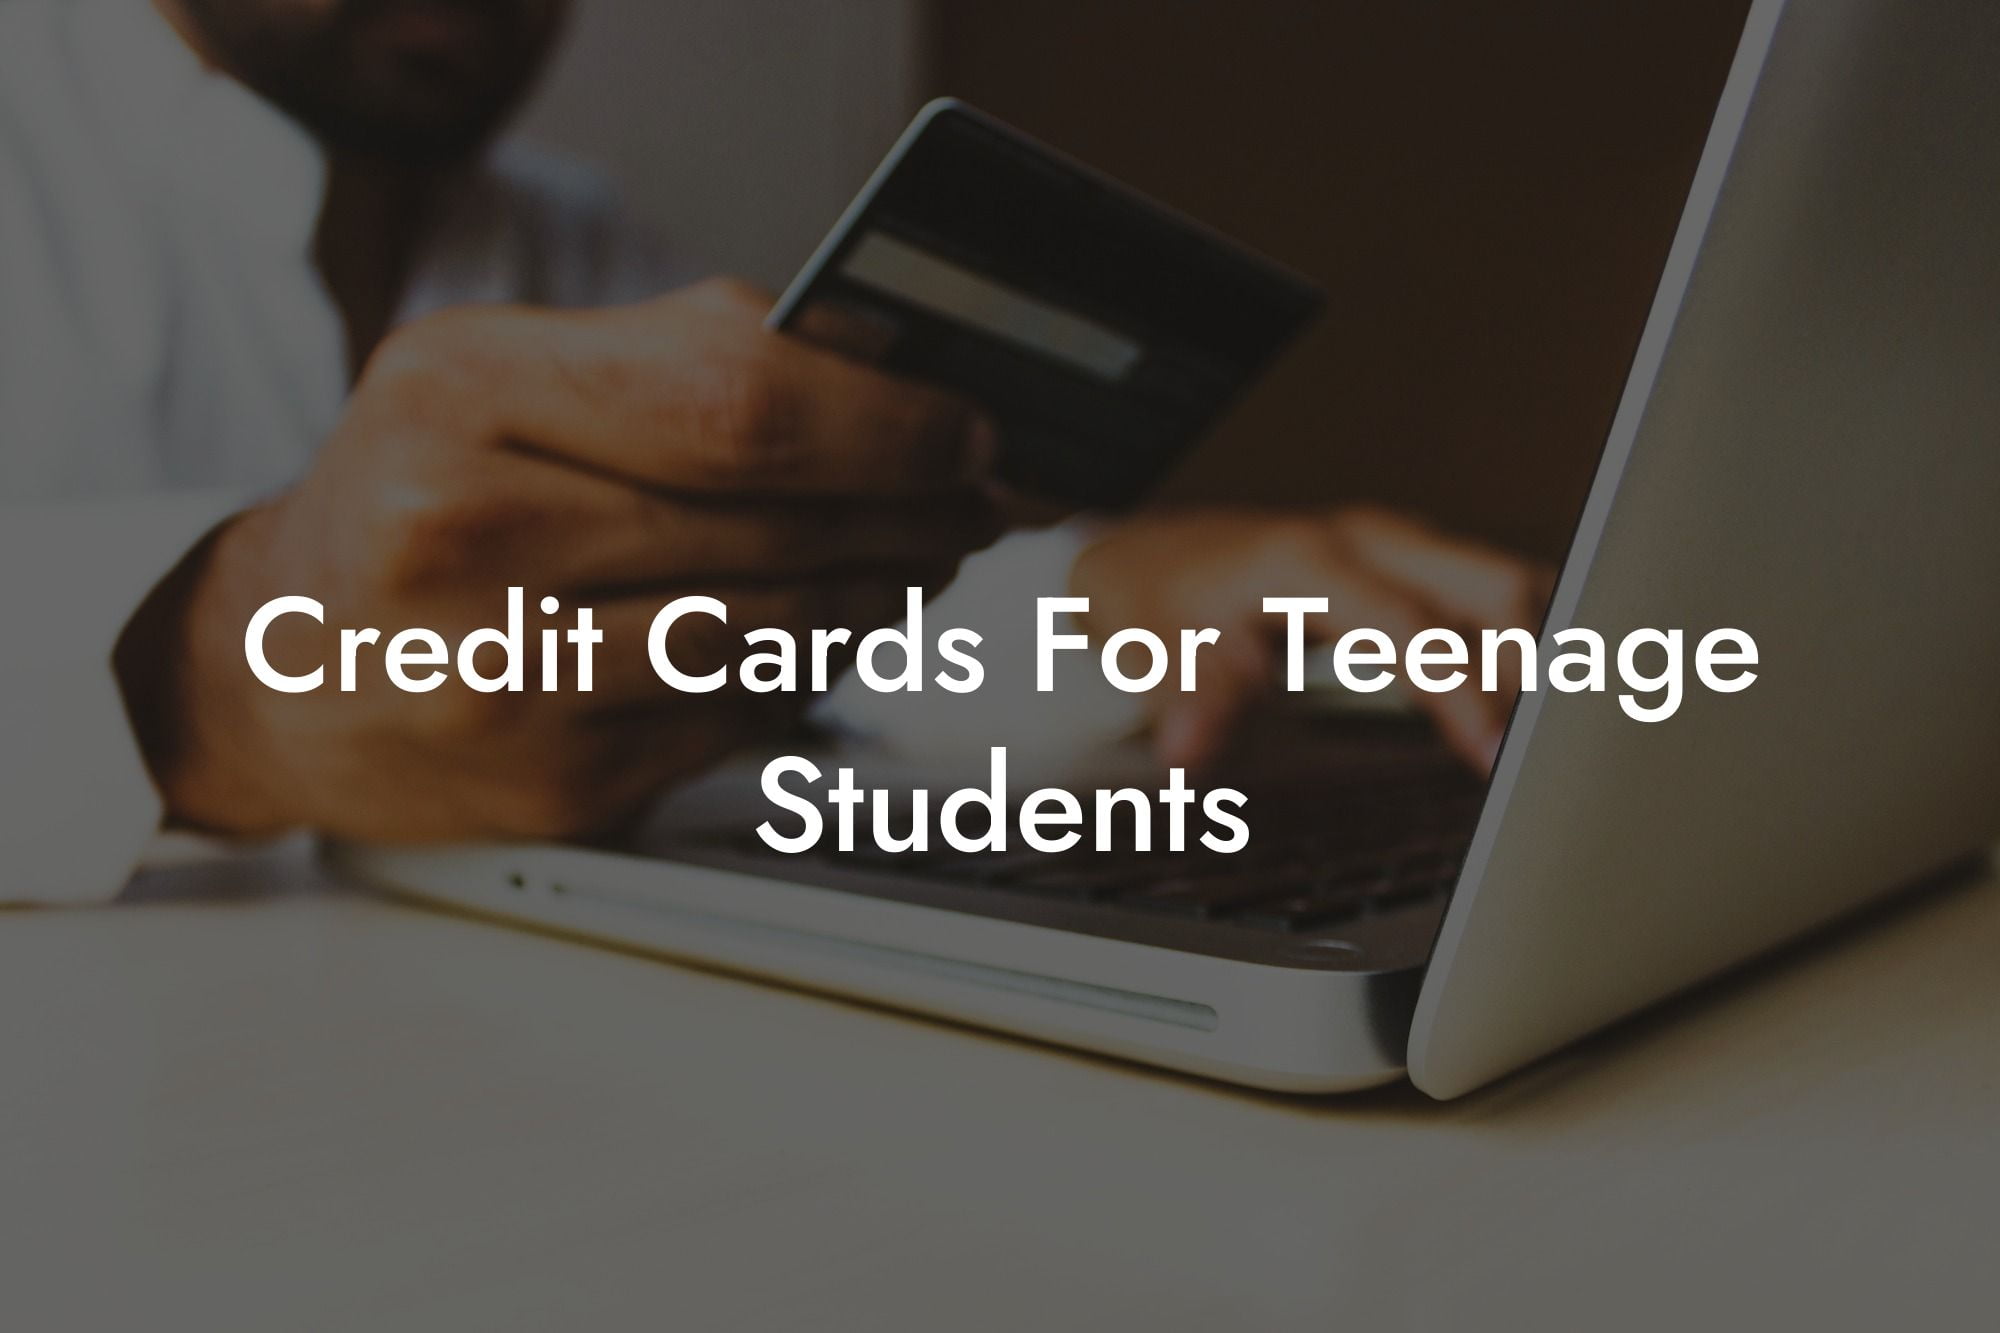 Credit Cards For Teenage Students